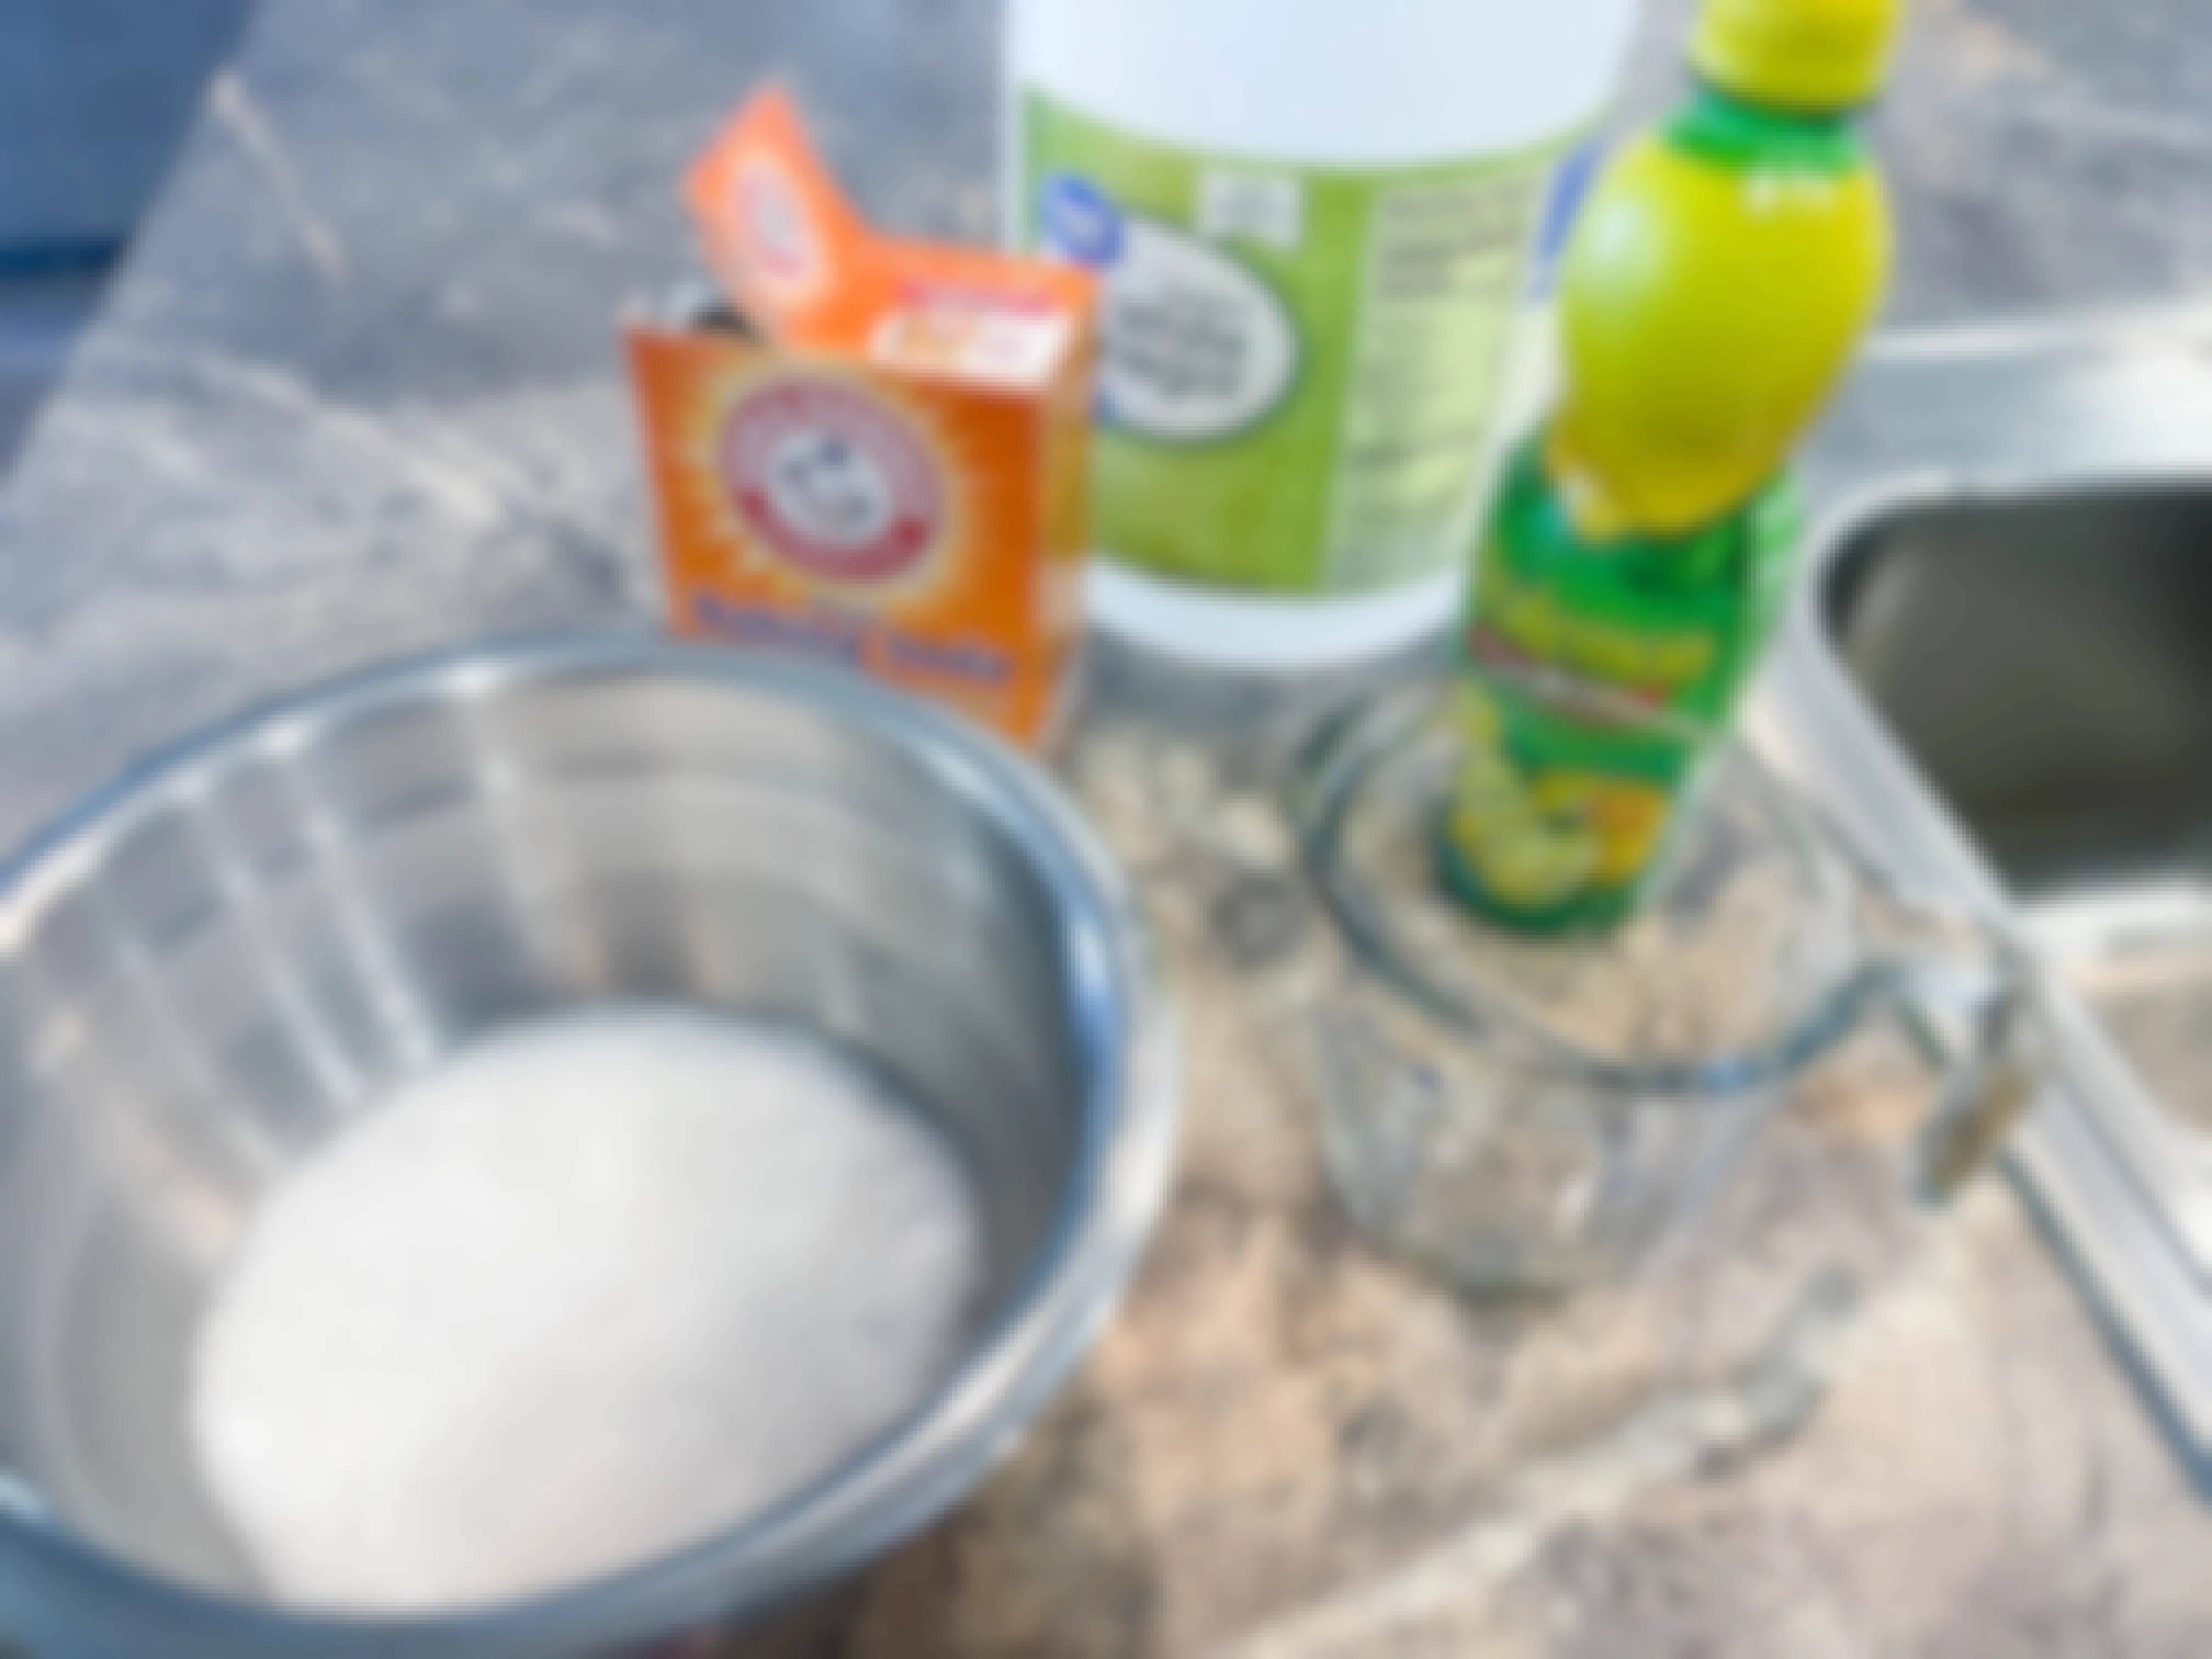 bowl with baking soda, vinegar, and lemon juice on counter